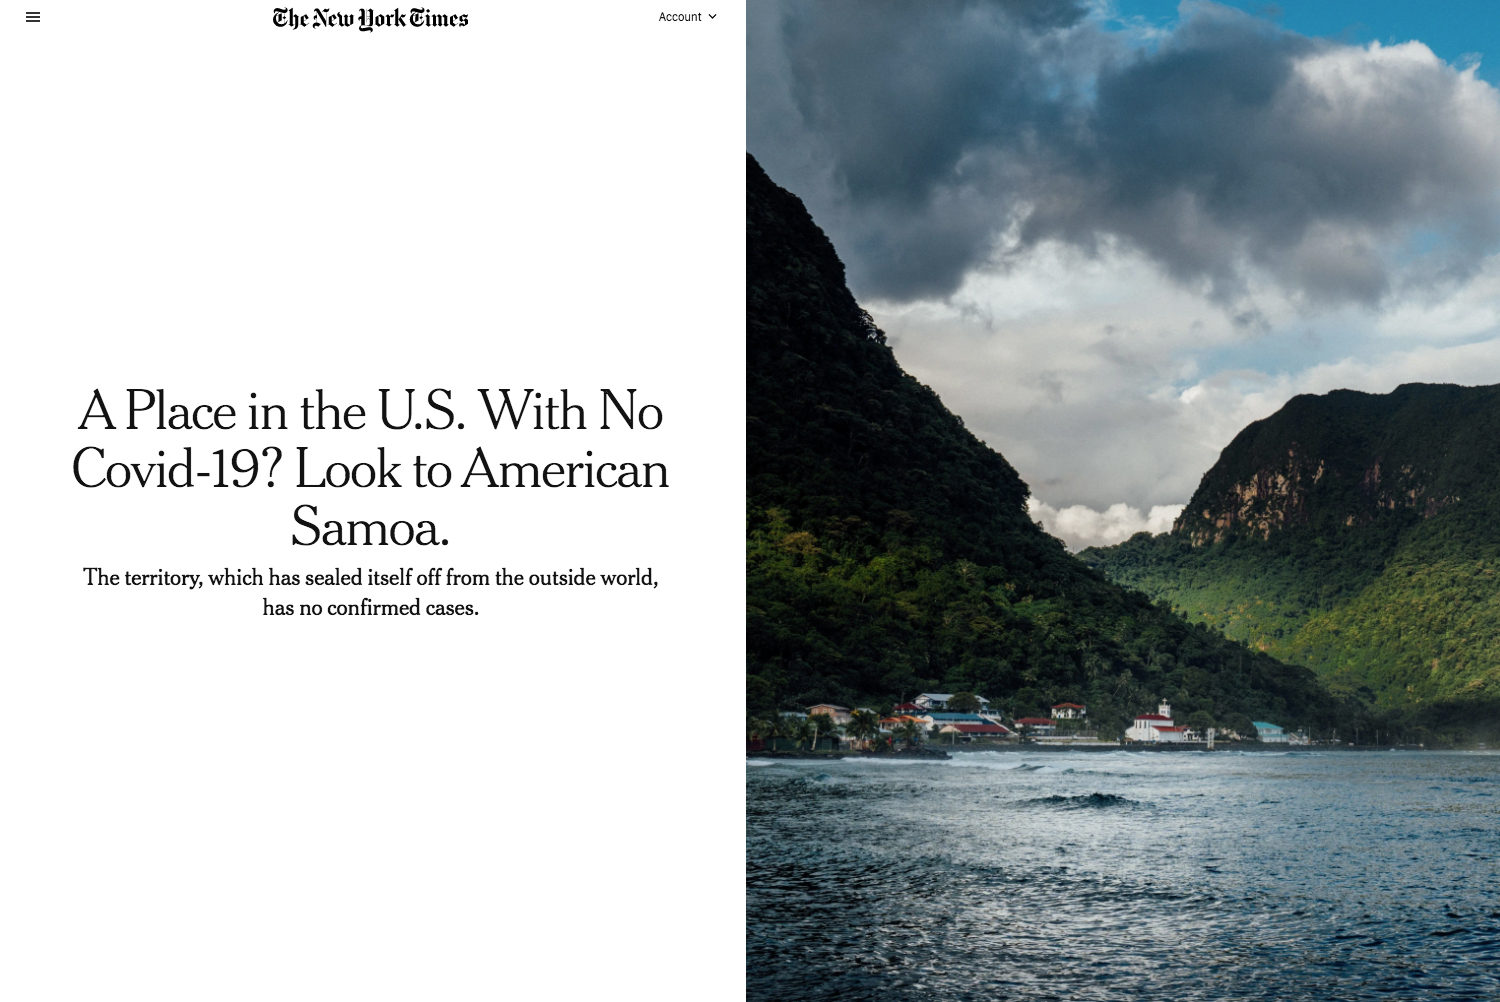 A Place in the U.S. With No Covid-19? Look to American Samoa.